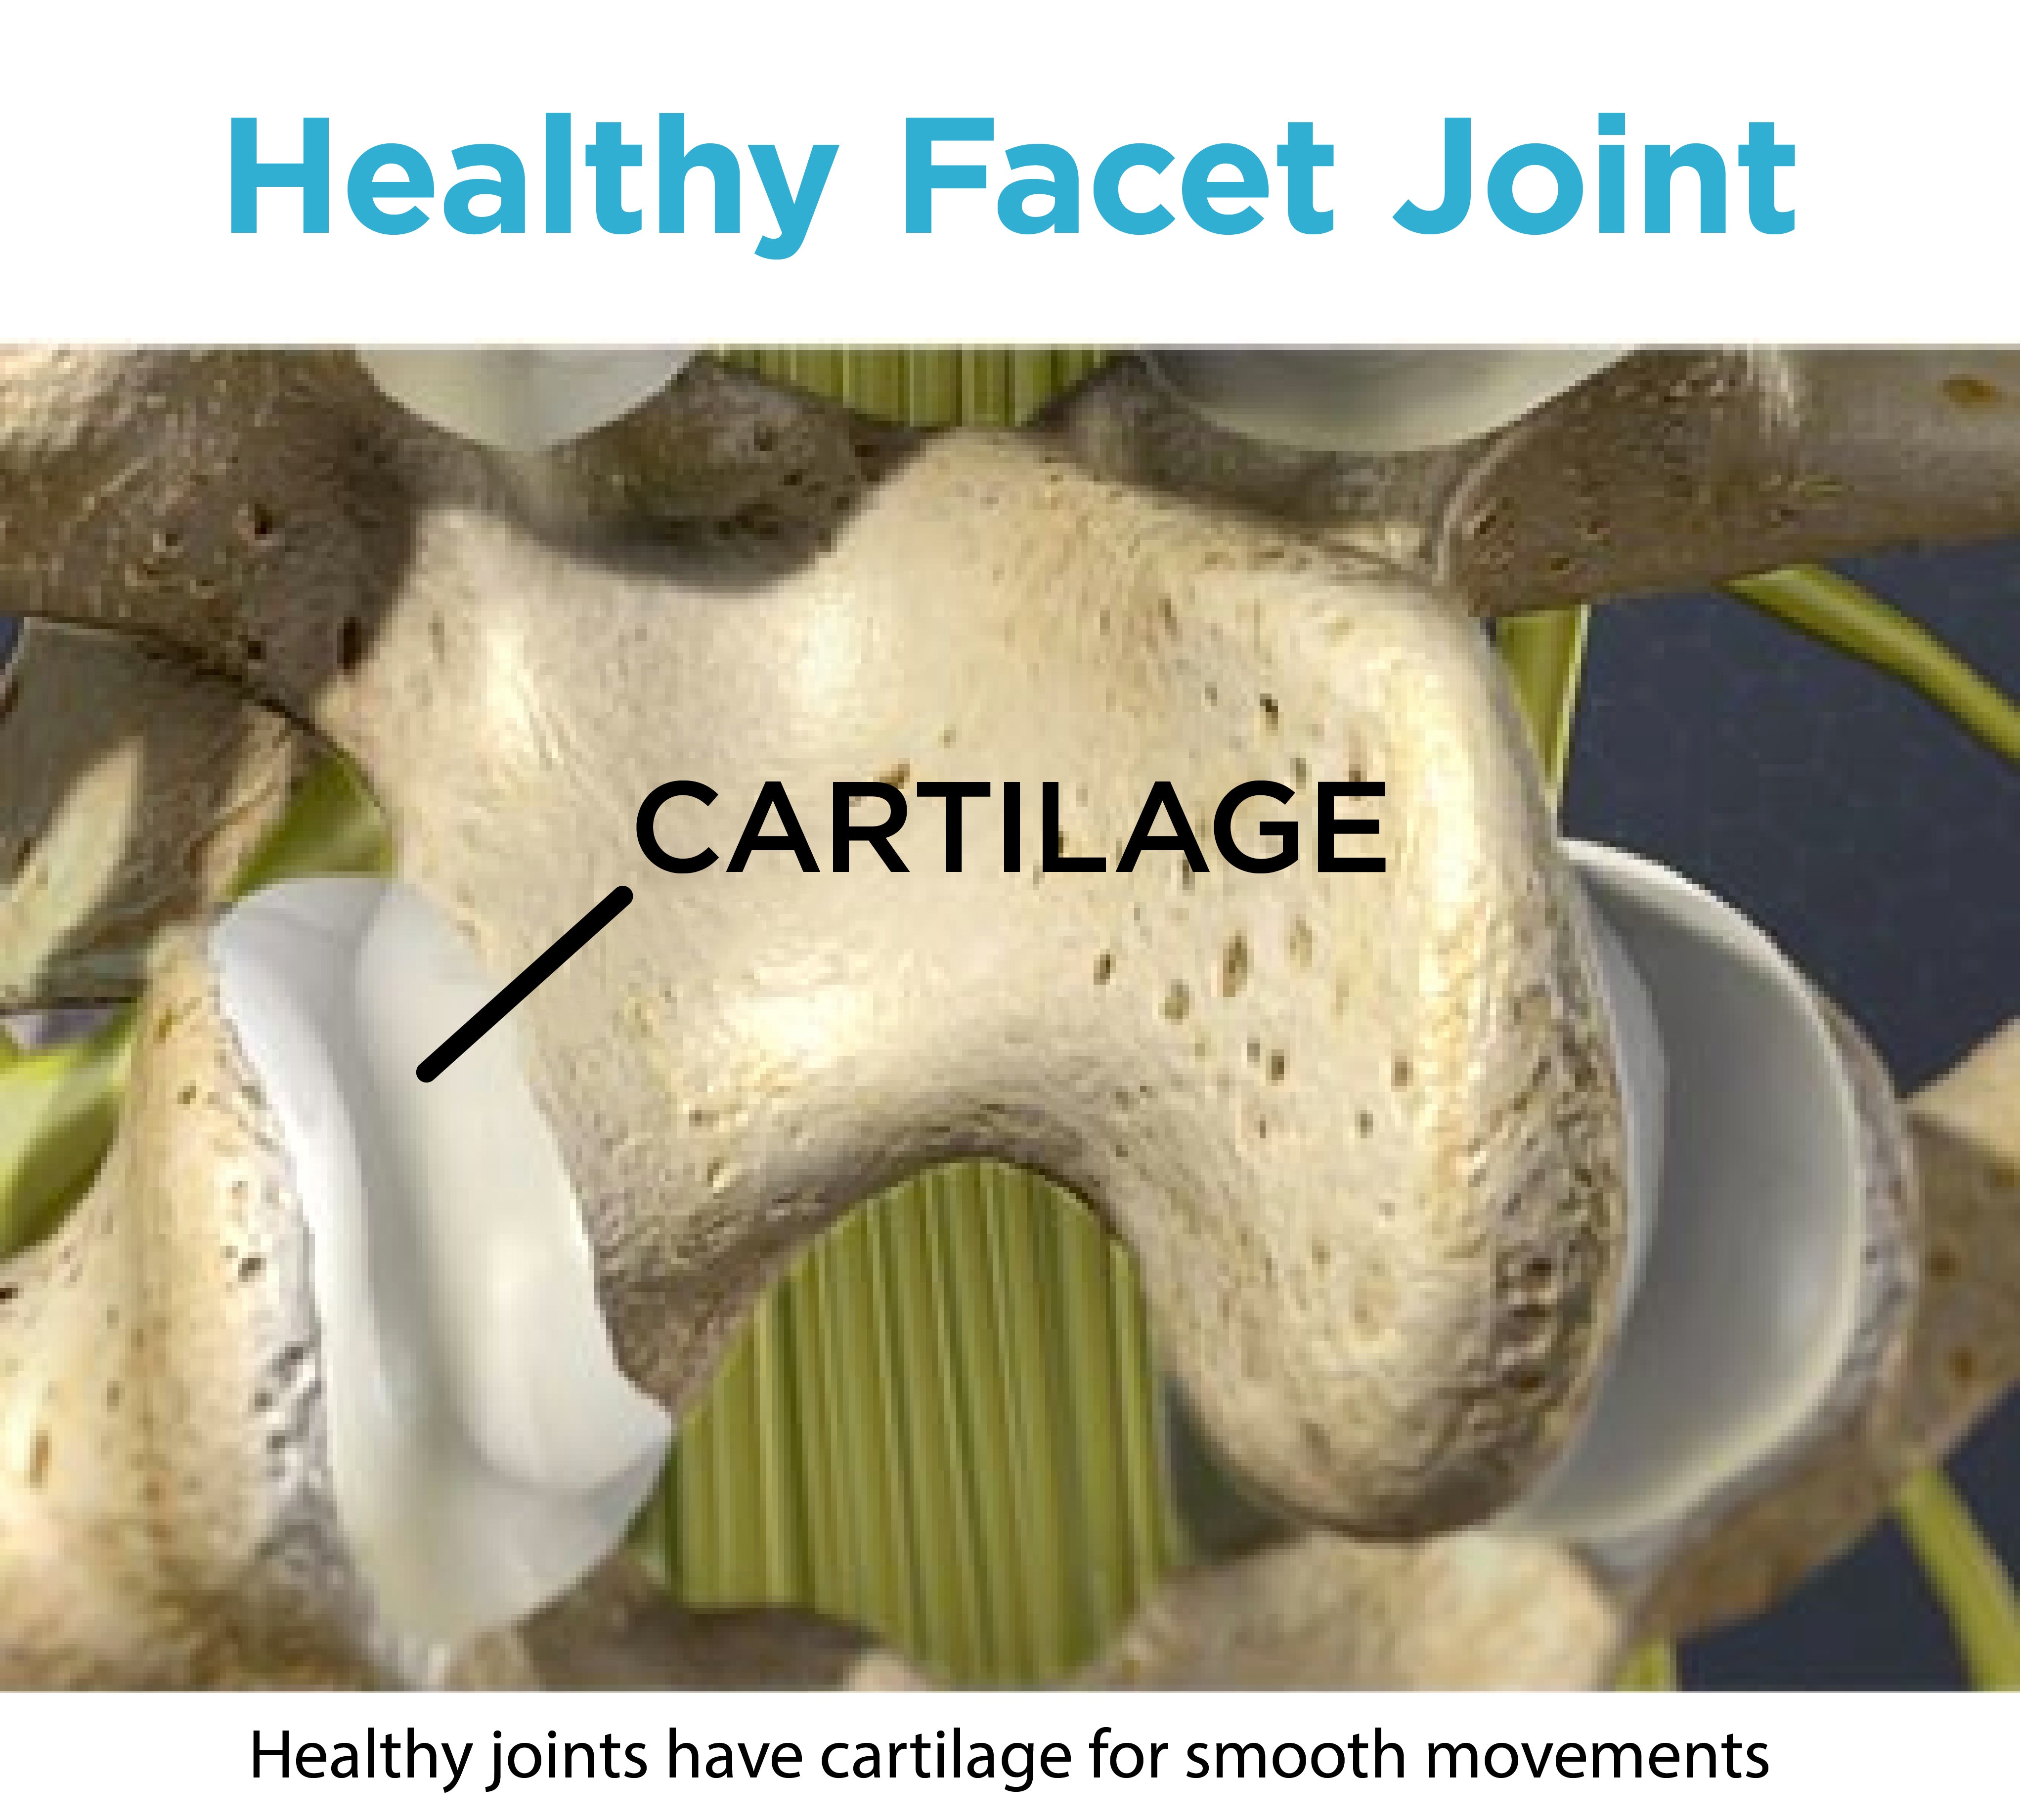 Healthy facet joints have cartilage for smooth movements